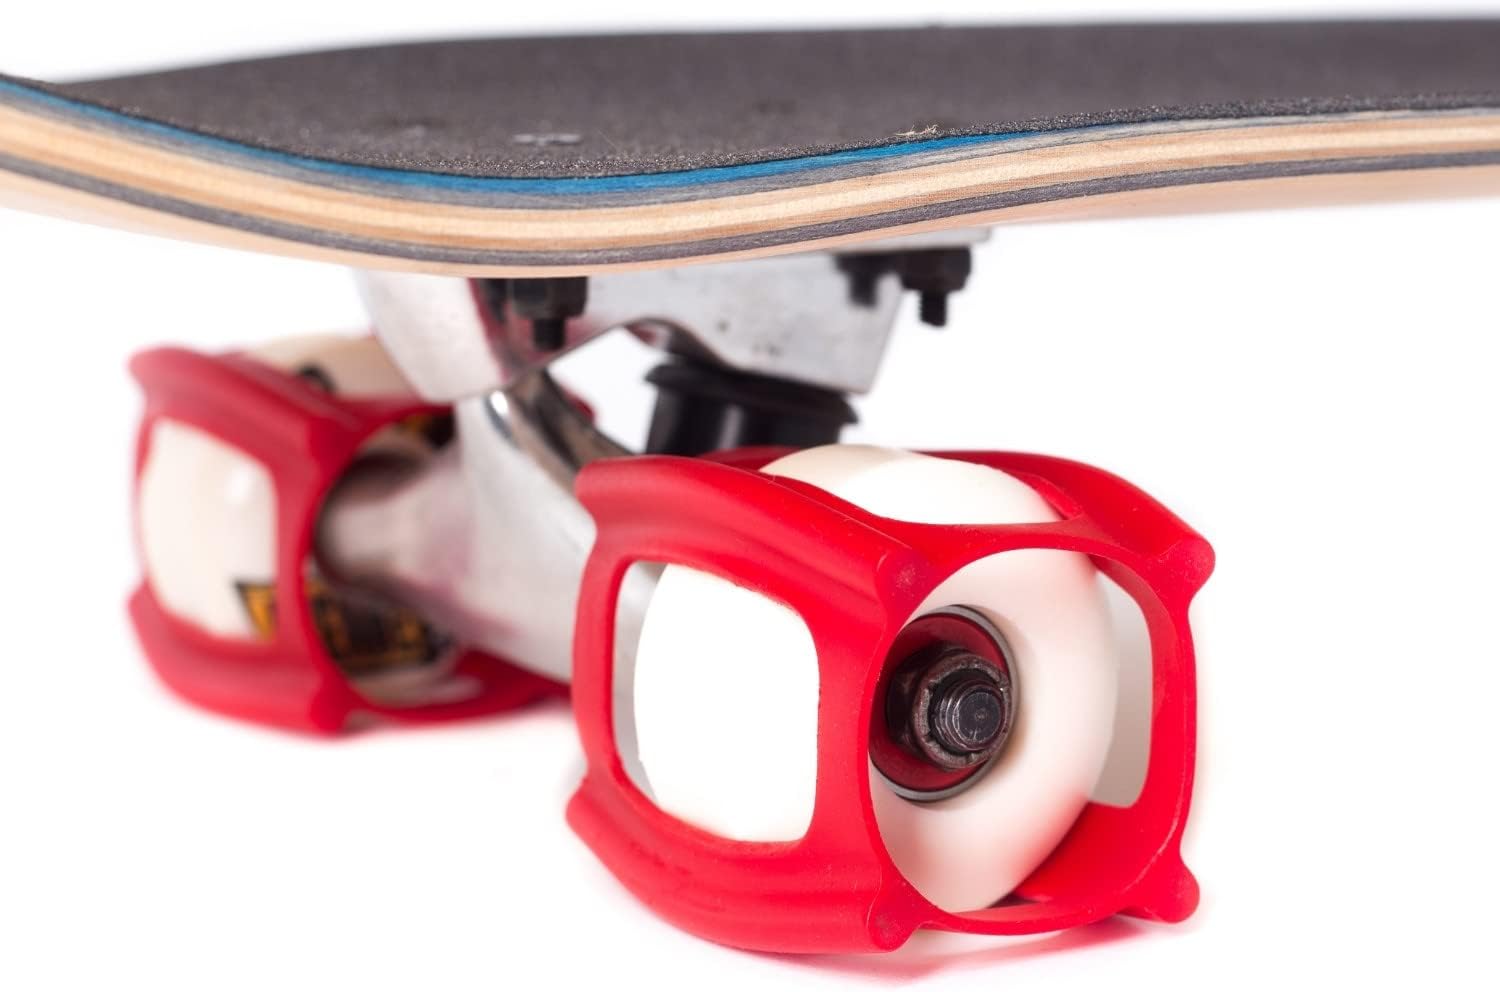 SkaterTrainers- Skateboard Tricks Fast No Experience Needed- Fun, Safe, and Easy- Ollies, Kickflips and More- All Ages- Accessories Make Great Stocking Stuffers Gifts for Teen Boys and Girls